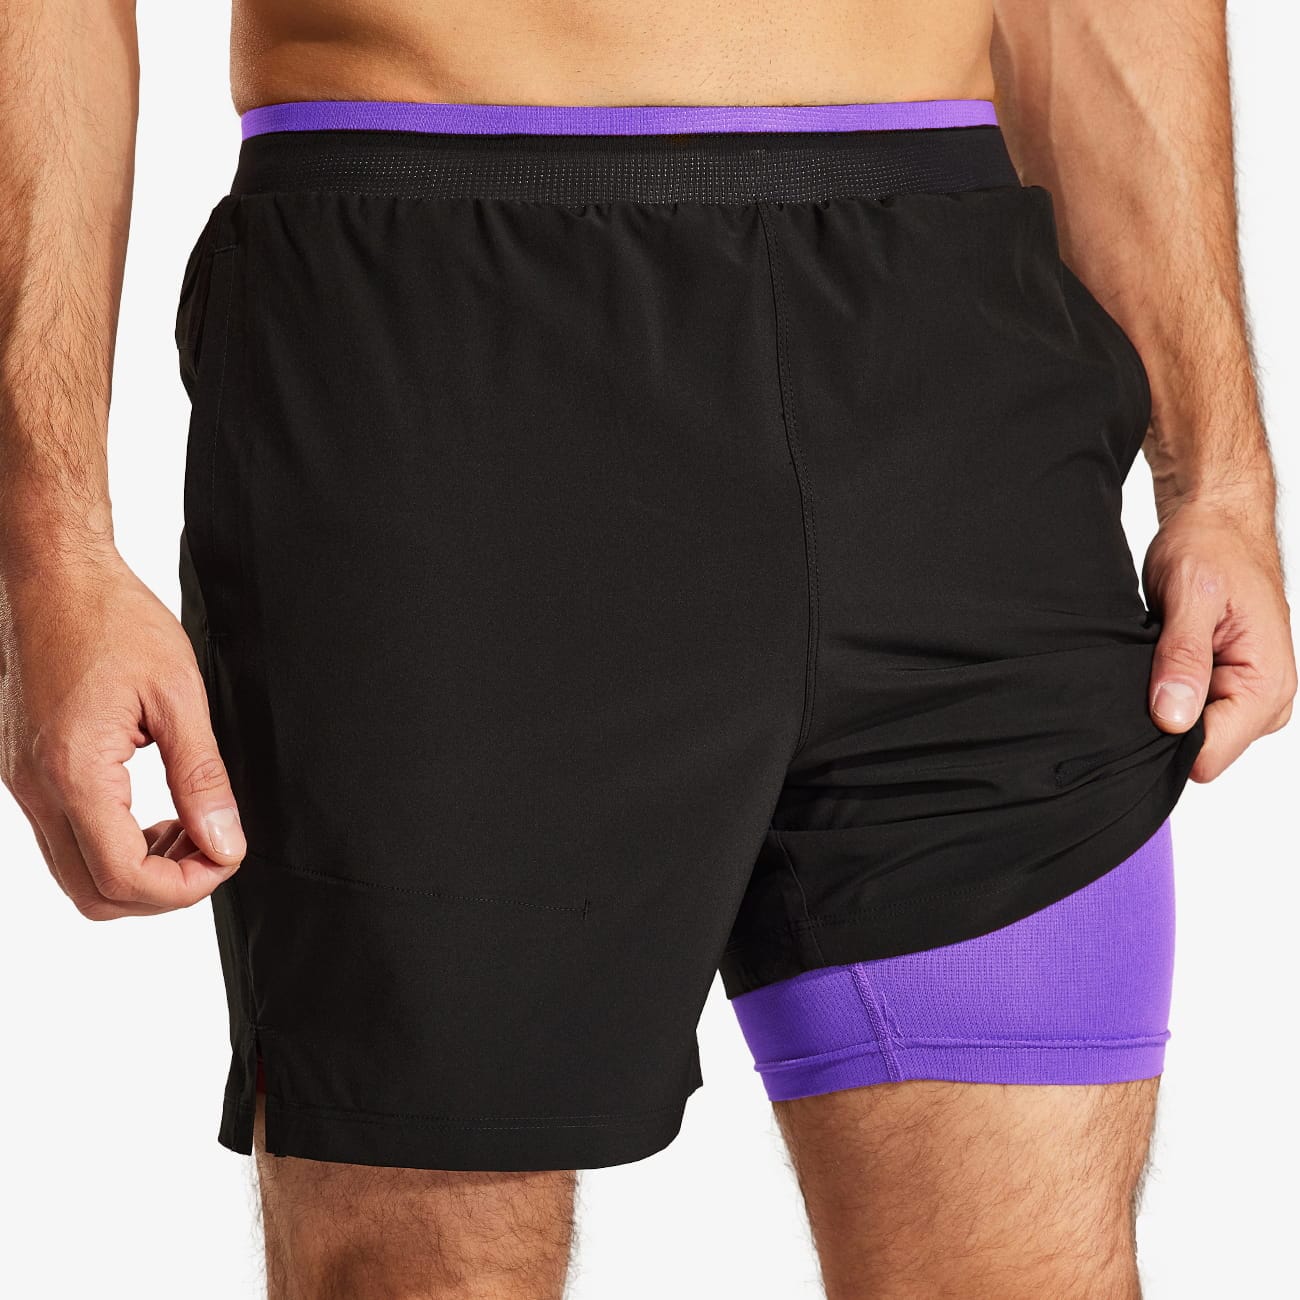 Men's 2 in 1 Running Shorts with Liner 5" Quick Dry Athletic Shorts Men's Shorts Black Purple / S MIER